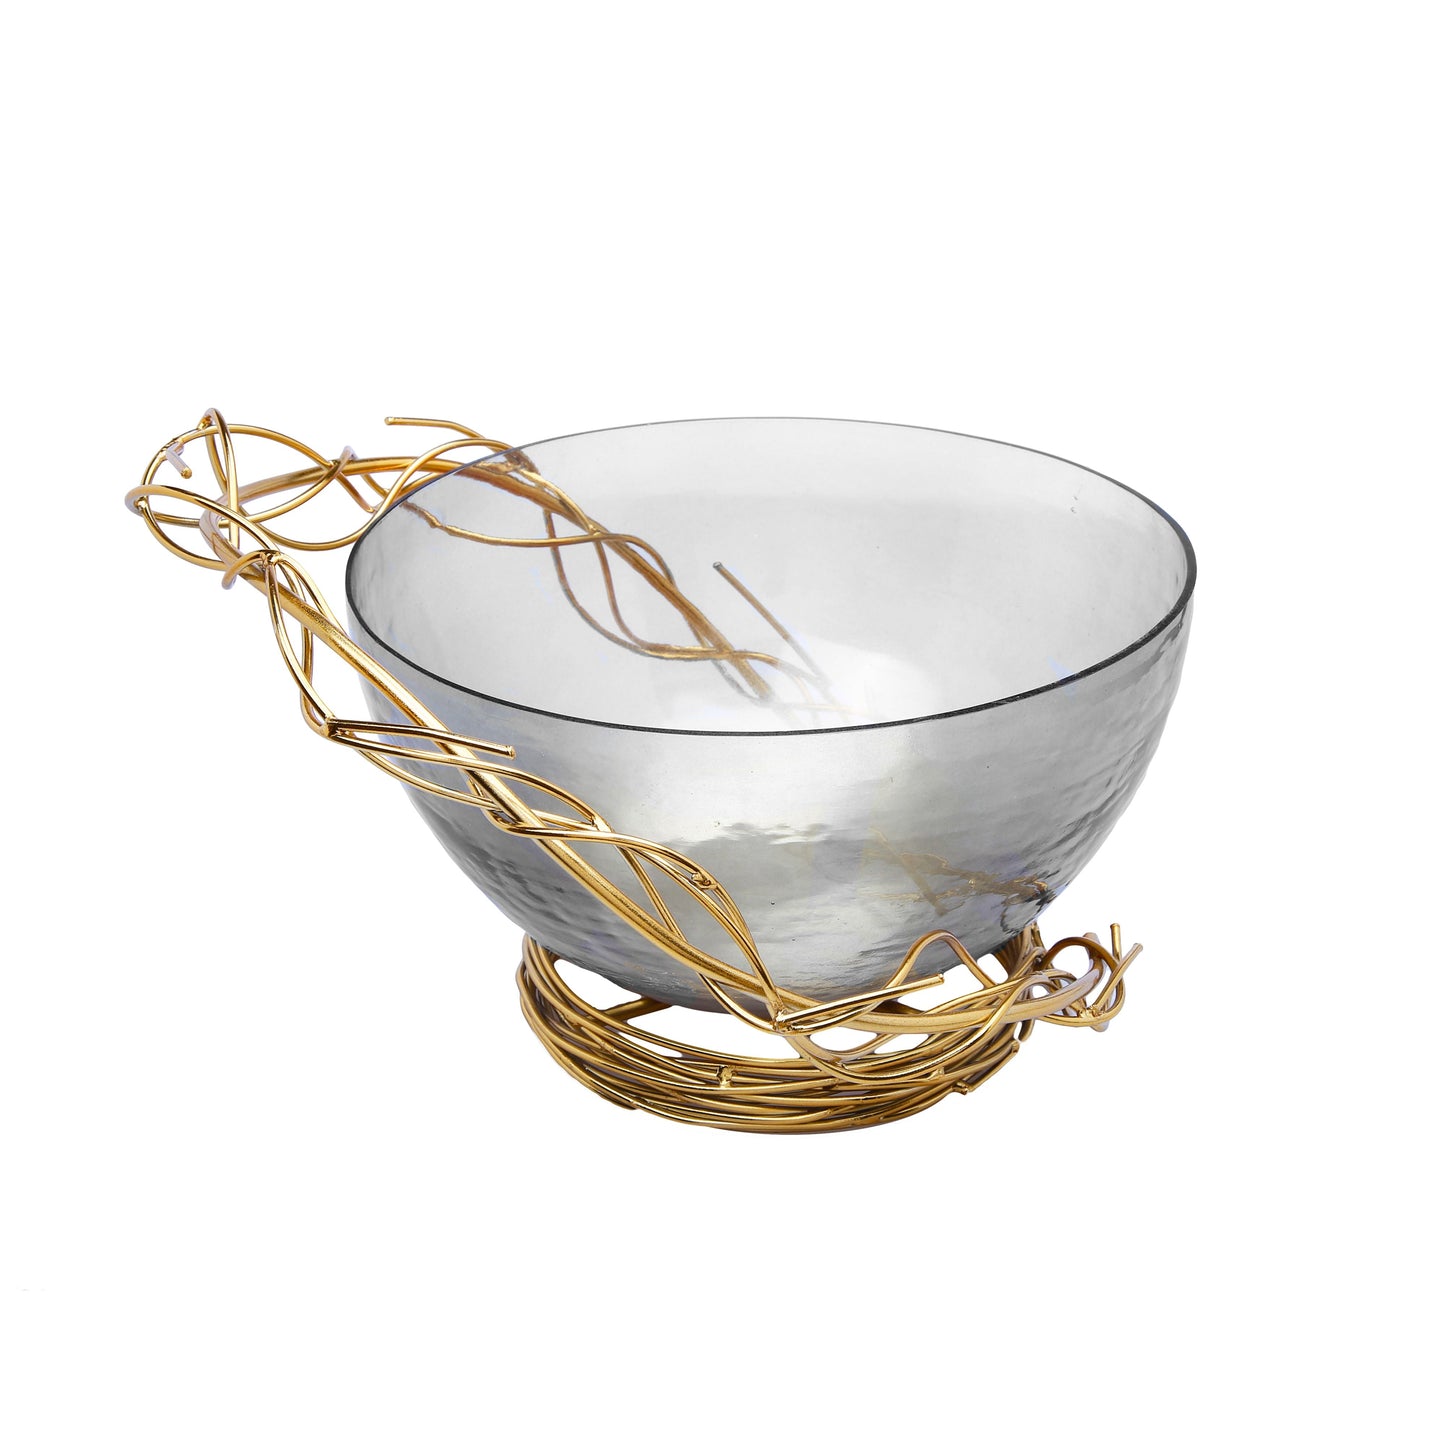 Classic Touch Smoked Glass Salad Bowl With Gold Twig Design, 12"